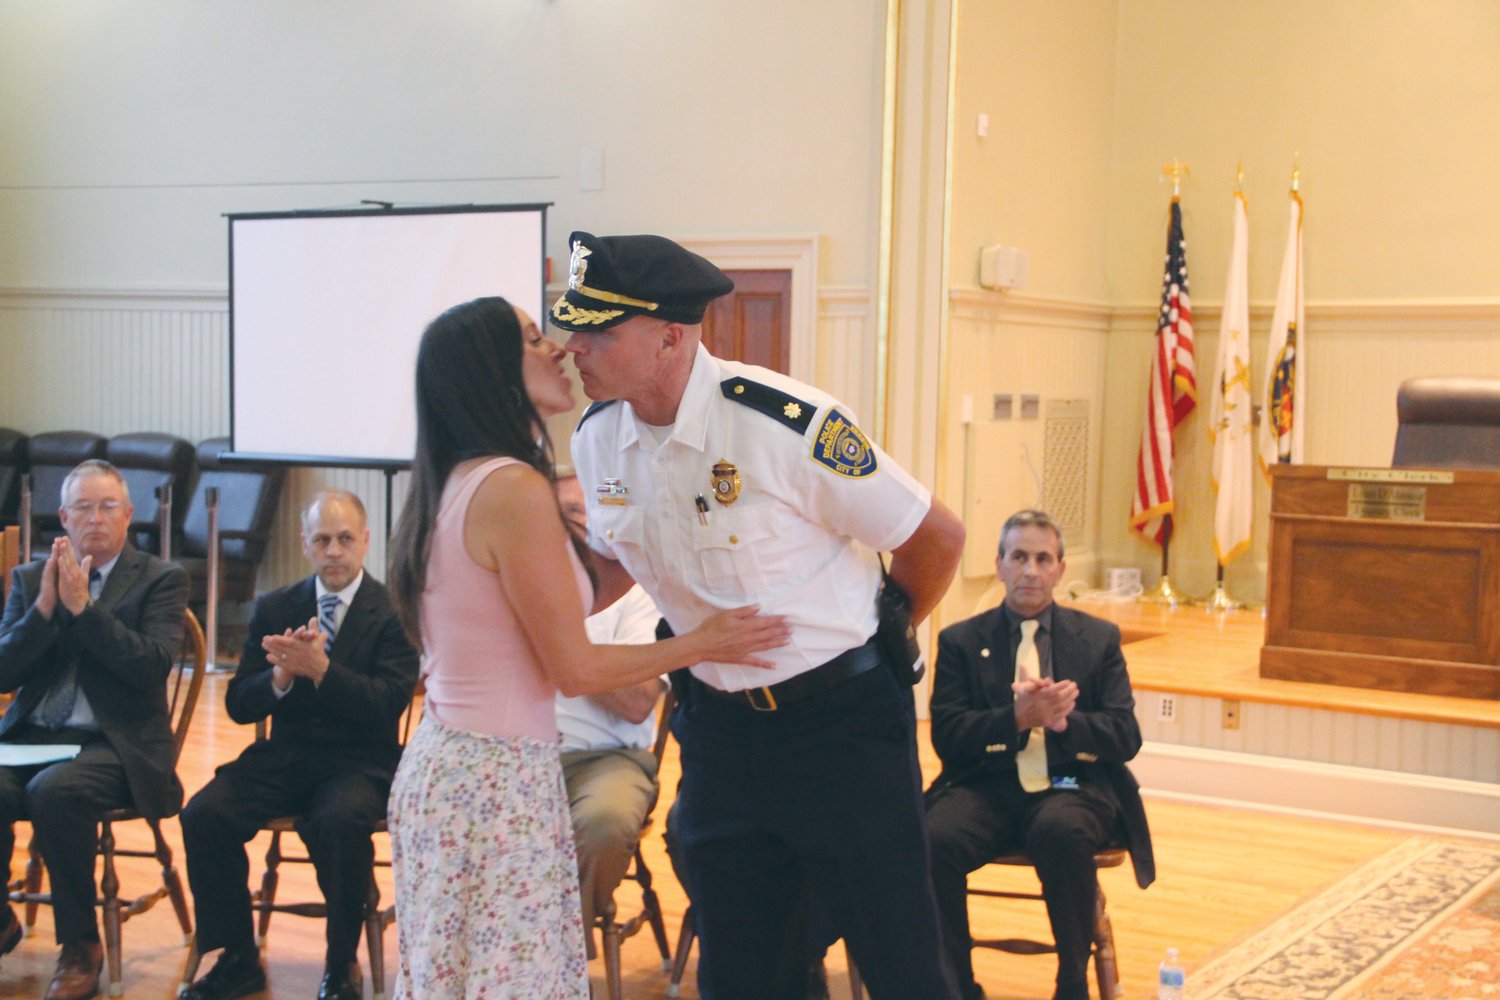 PINNED AND A KISS: Mary Sullivan kisses her husband Major Andrew Sullivan after affixing his badge.